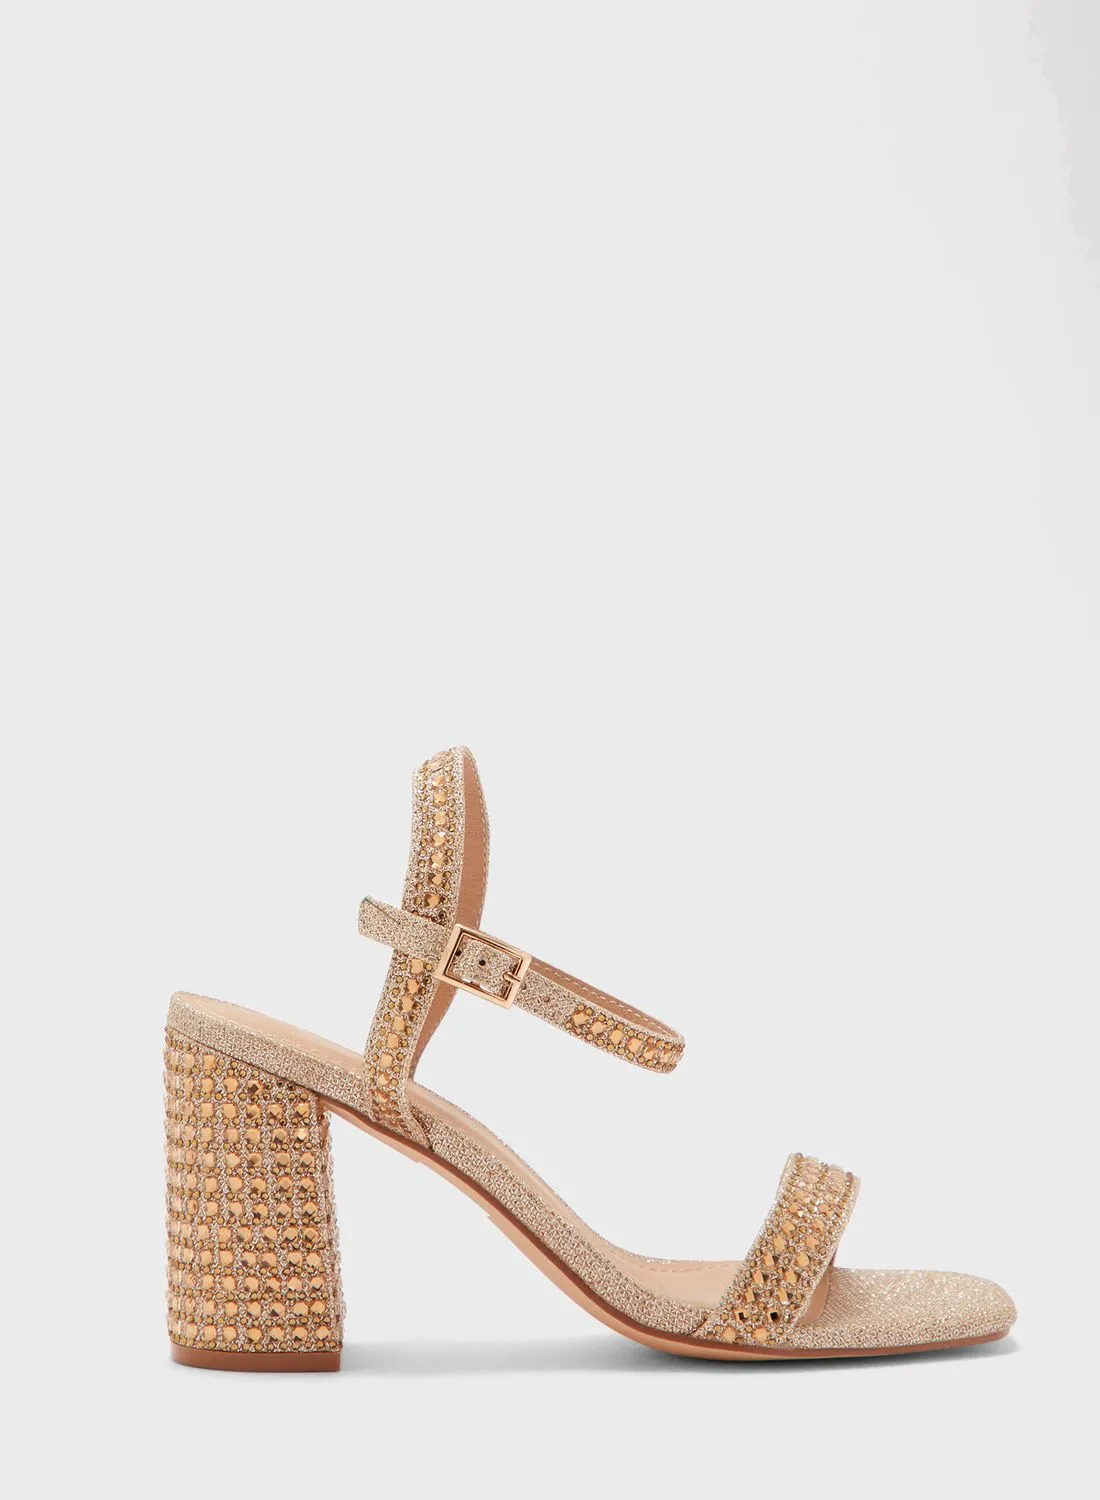 Truffle Jewelled Gold Ankle Strap Sandal